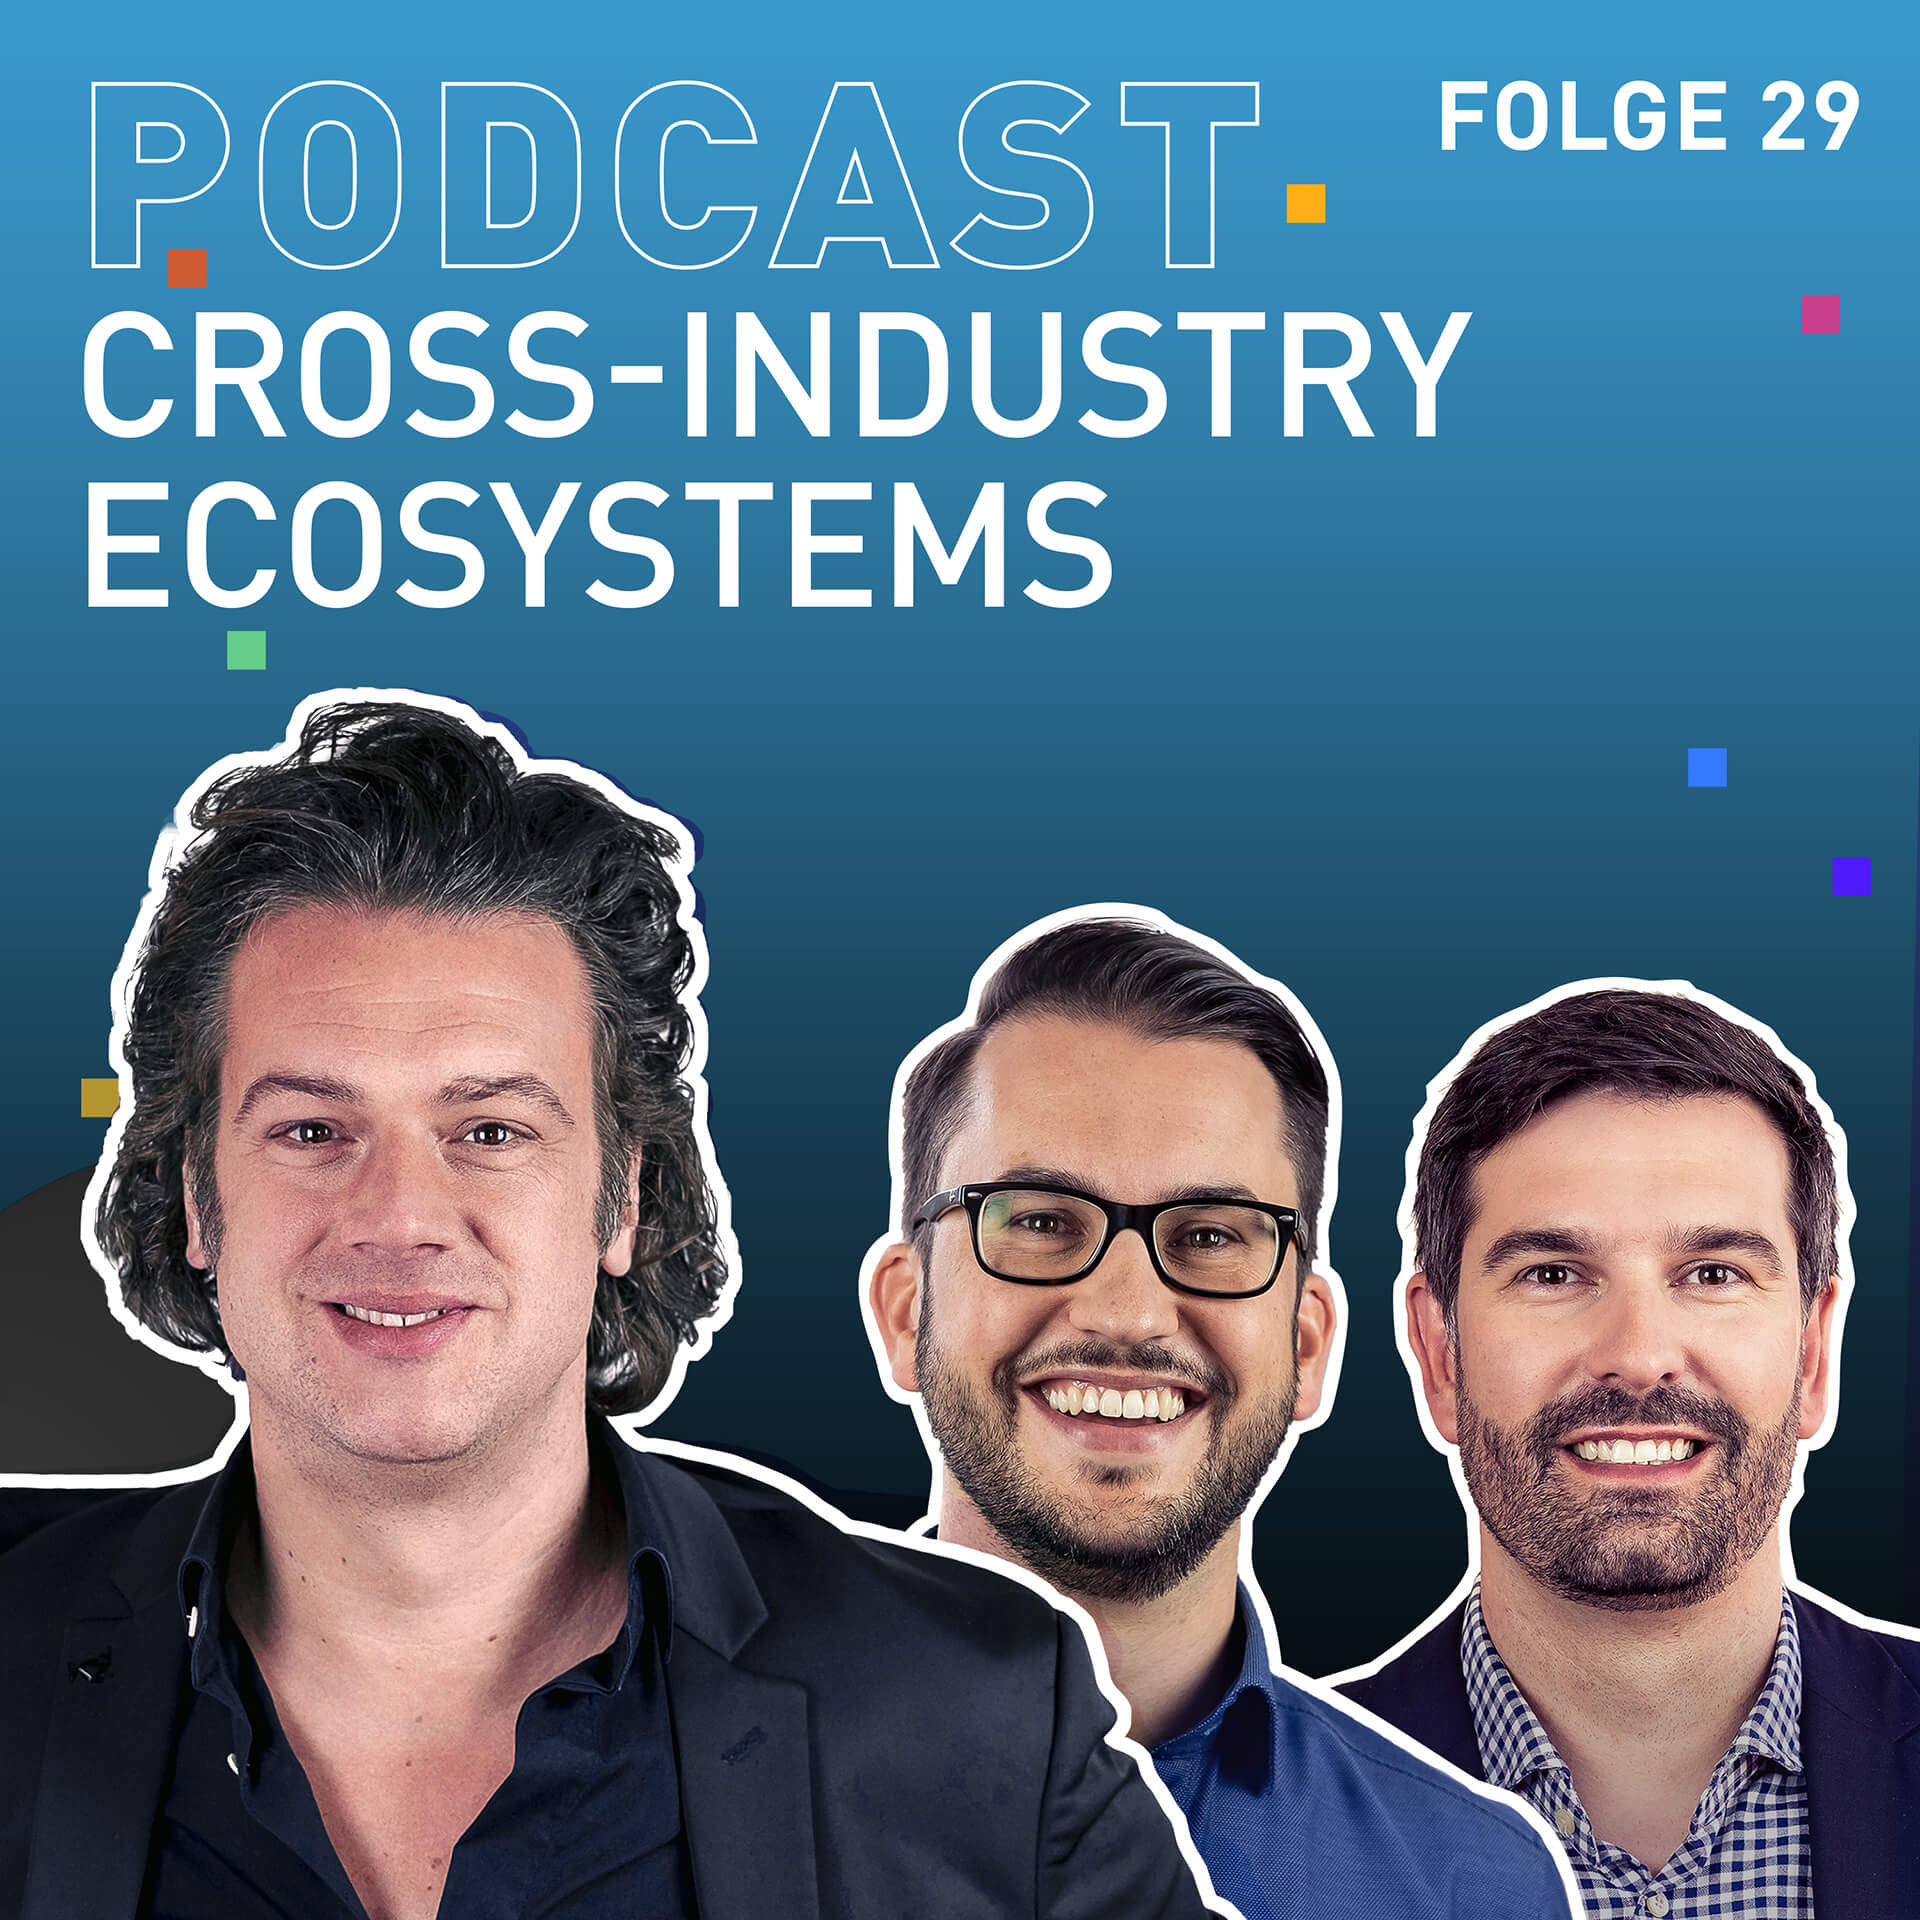 TRENDONE Podcast "Innovation geht anders" #29 Cross-Industry Ecosystems mit Nils Müller